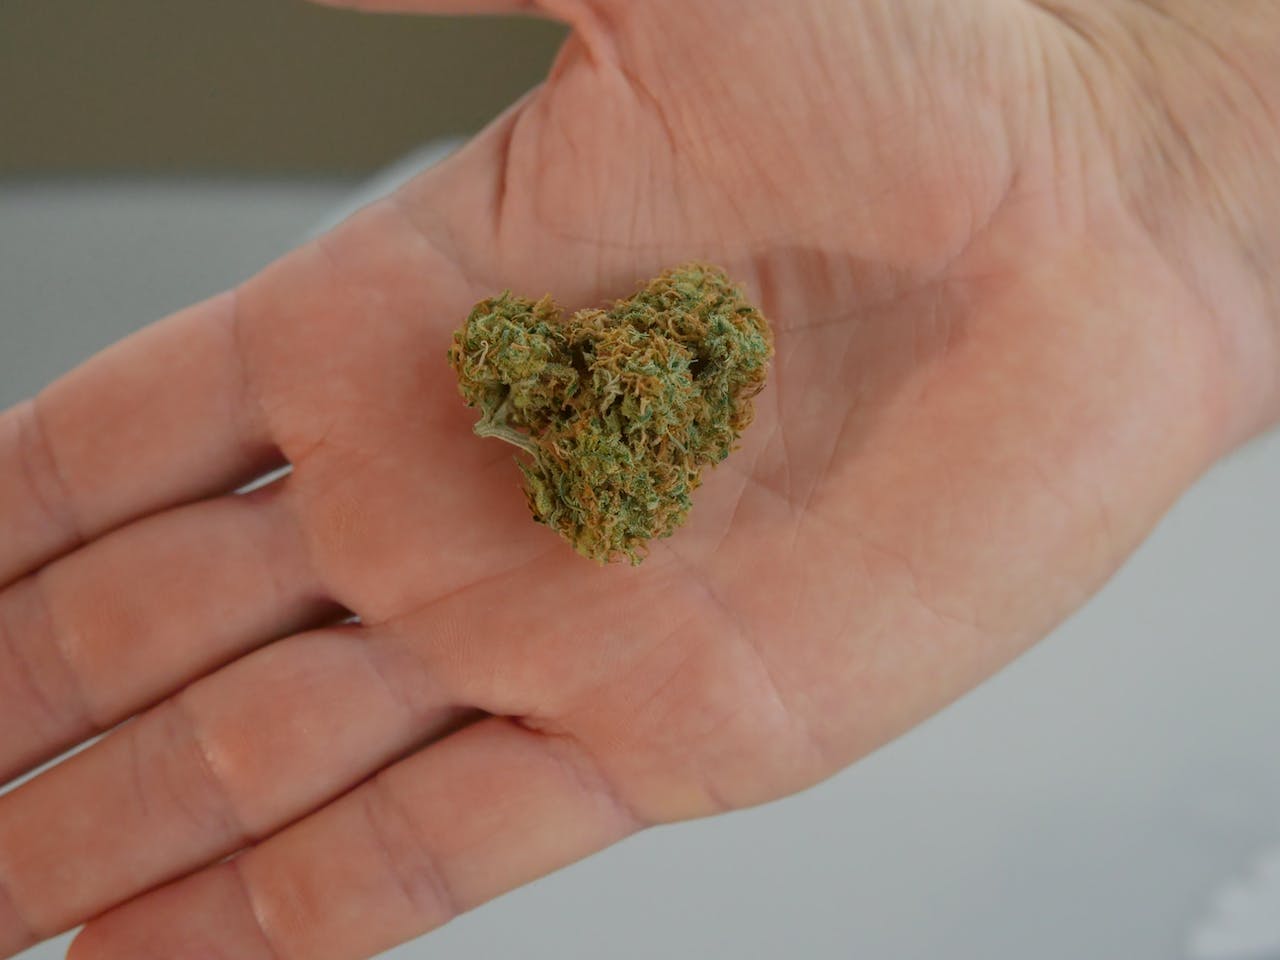 Kush on a Person's Palm